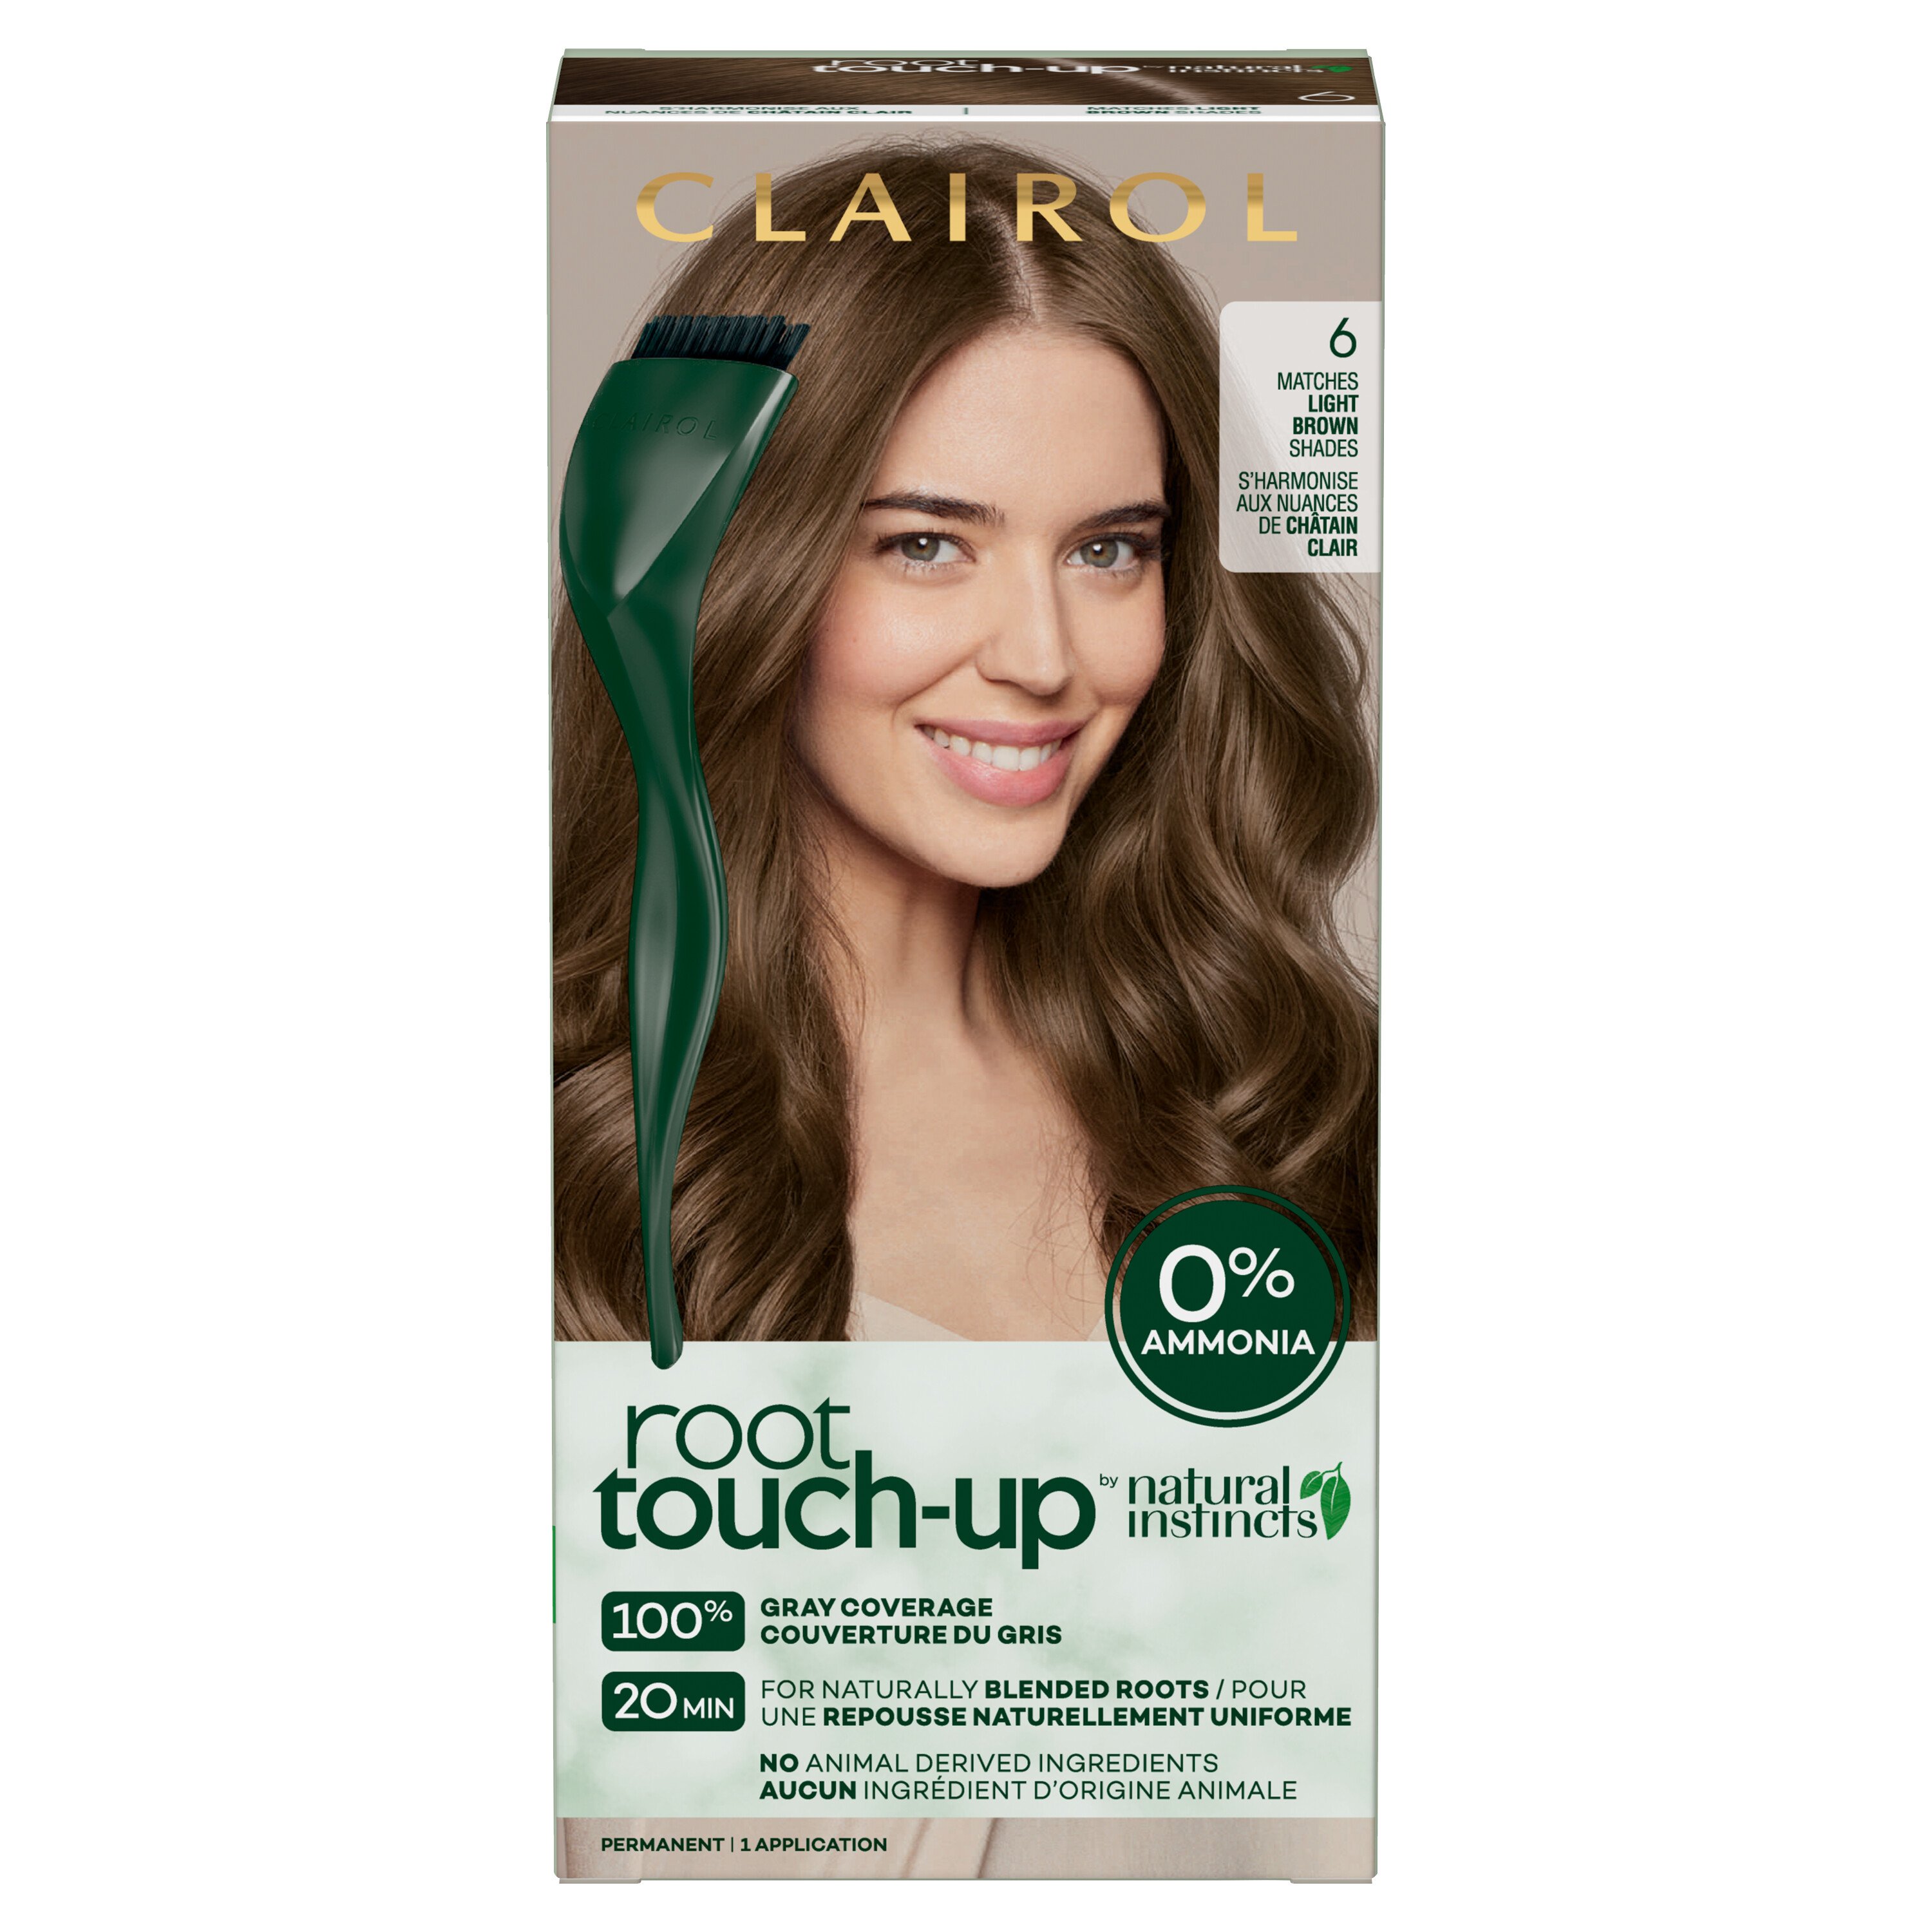 Clairol Root Touch-Up Natural Instincts Permanent Hair Color 6 Matches  Light Brown Shades - Shop Hair Color at H-E-B